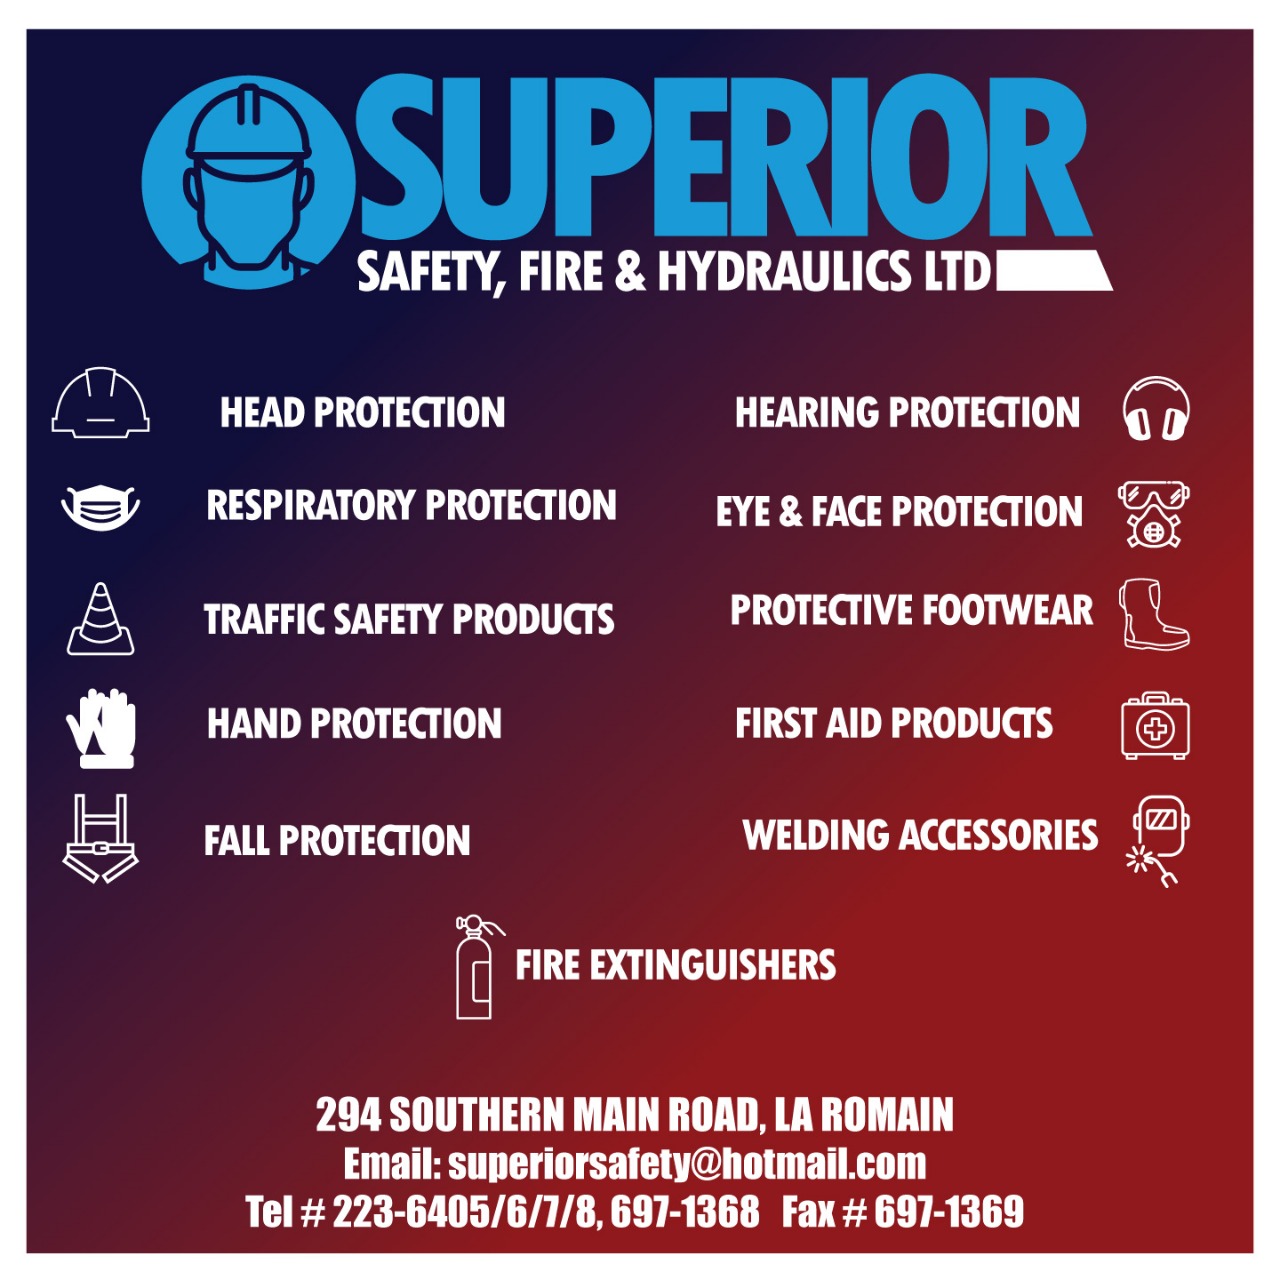 Superior Safety Fire & Hydraulics Ltd - FIRE EXTINGUISHERS